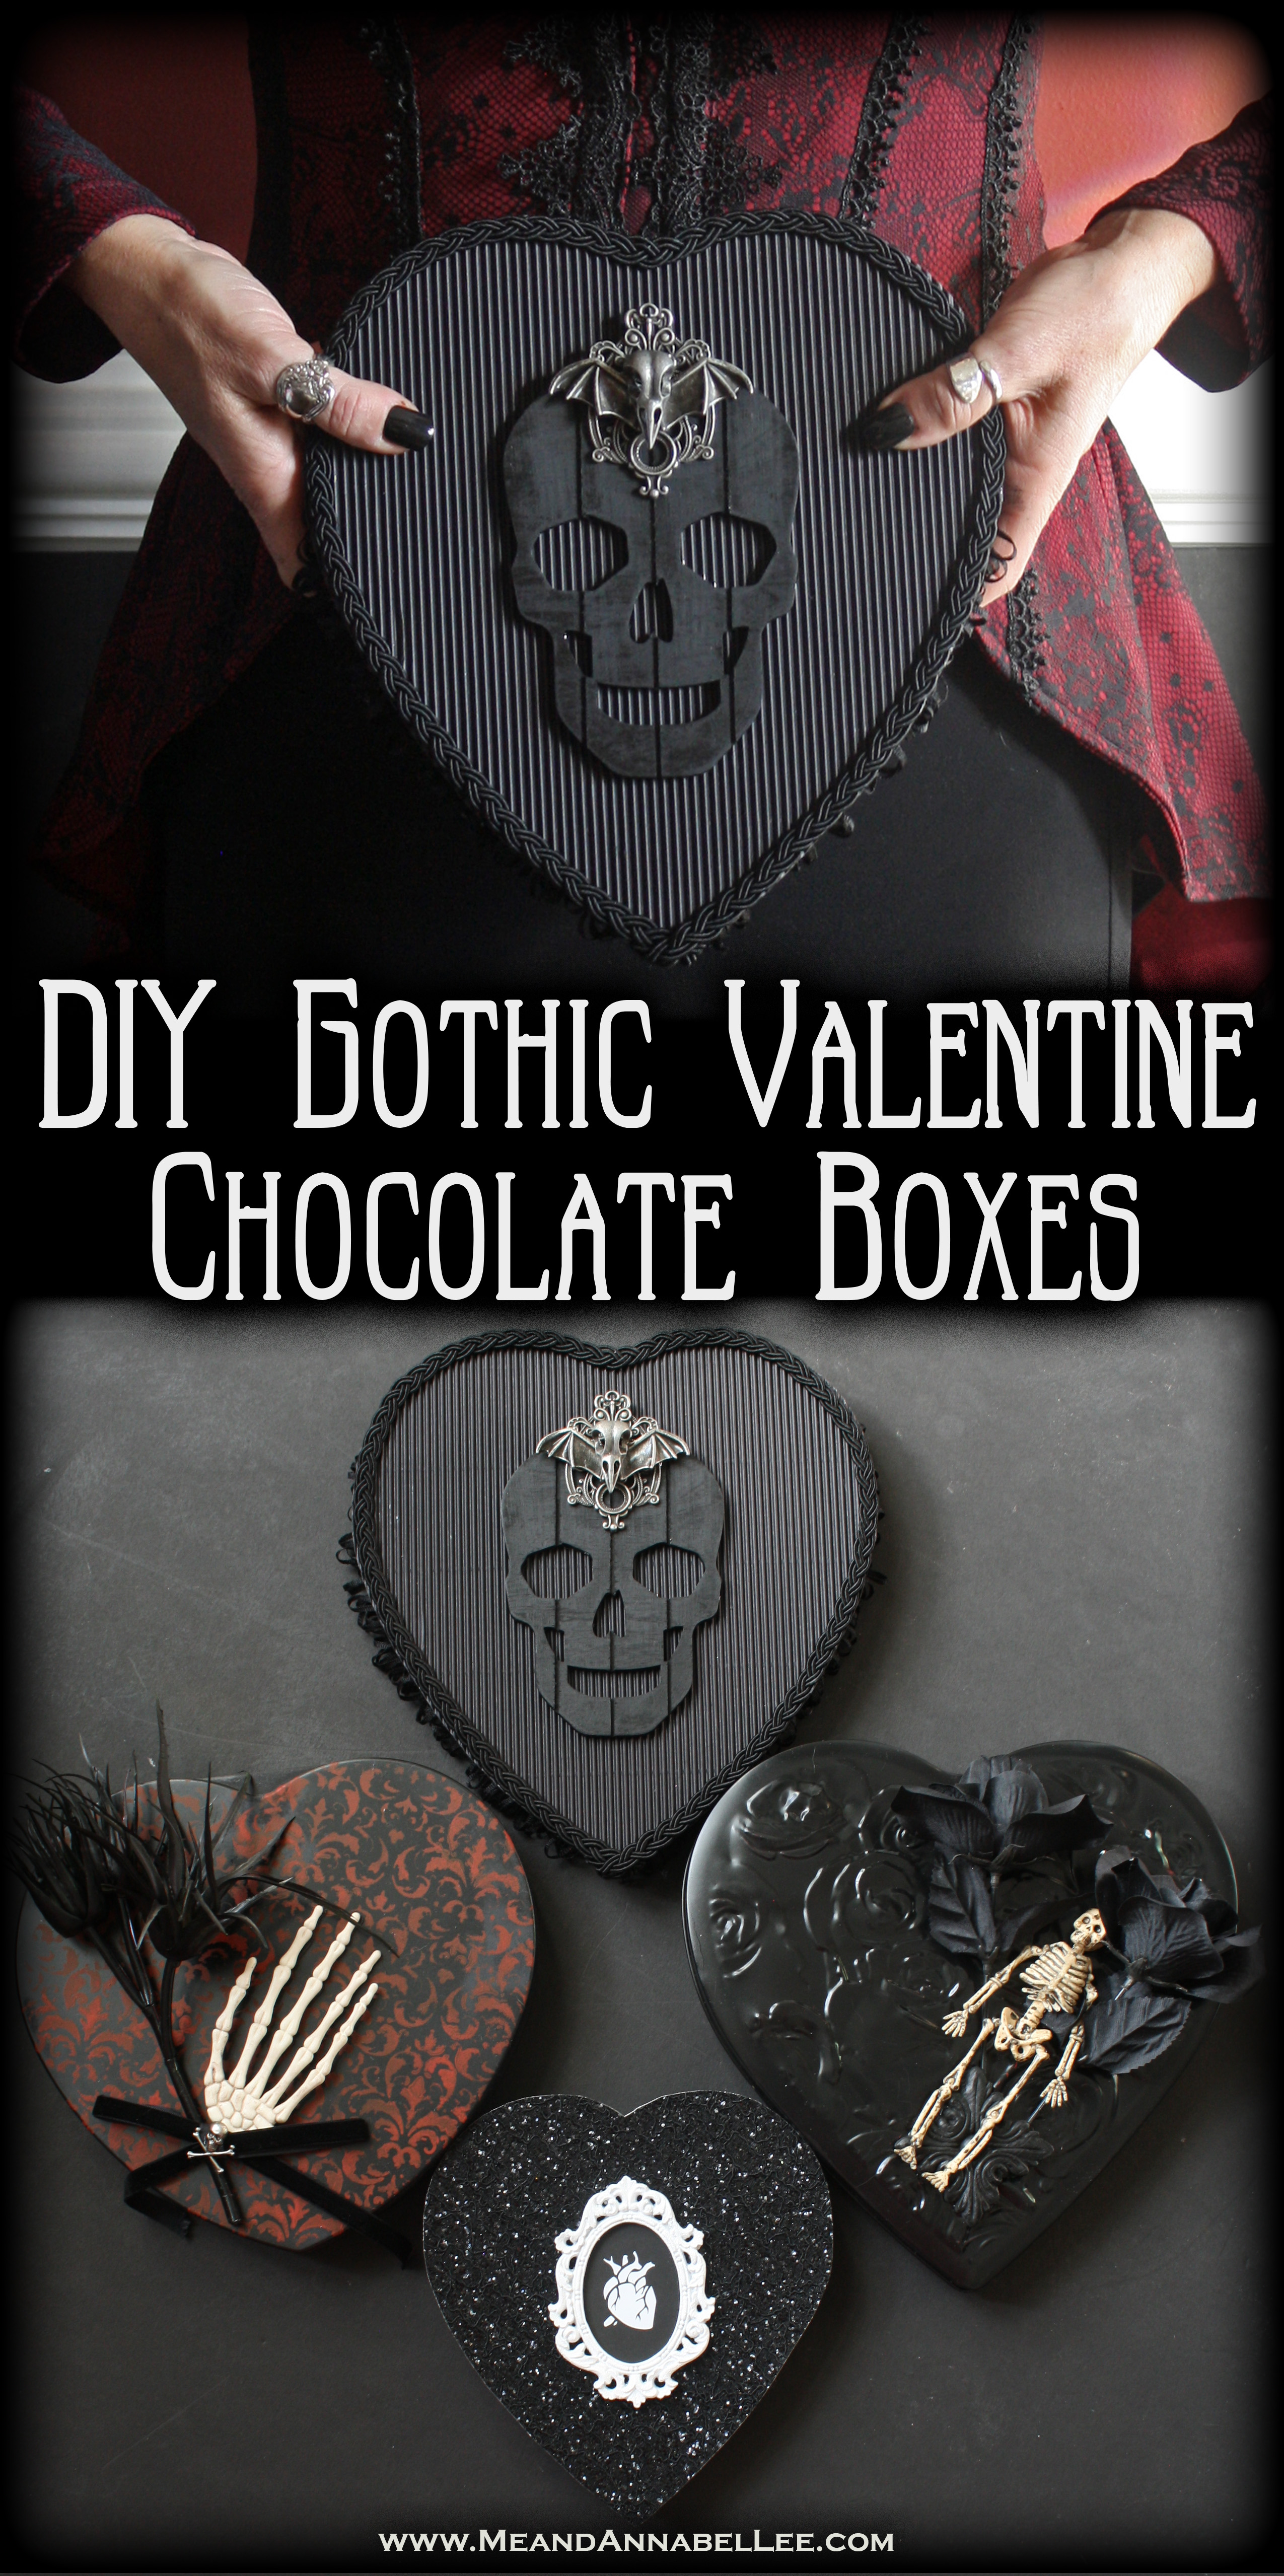 DIY Victorian and Gothic Valentine Boxes of Chocolates | Black Hearts | Black & White Anatomical Human Heart | Skeletons | Dark Romance | www.MeandAnnabelLee.com